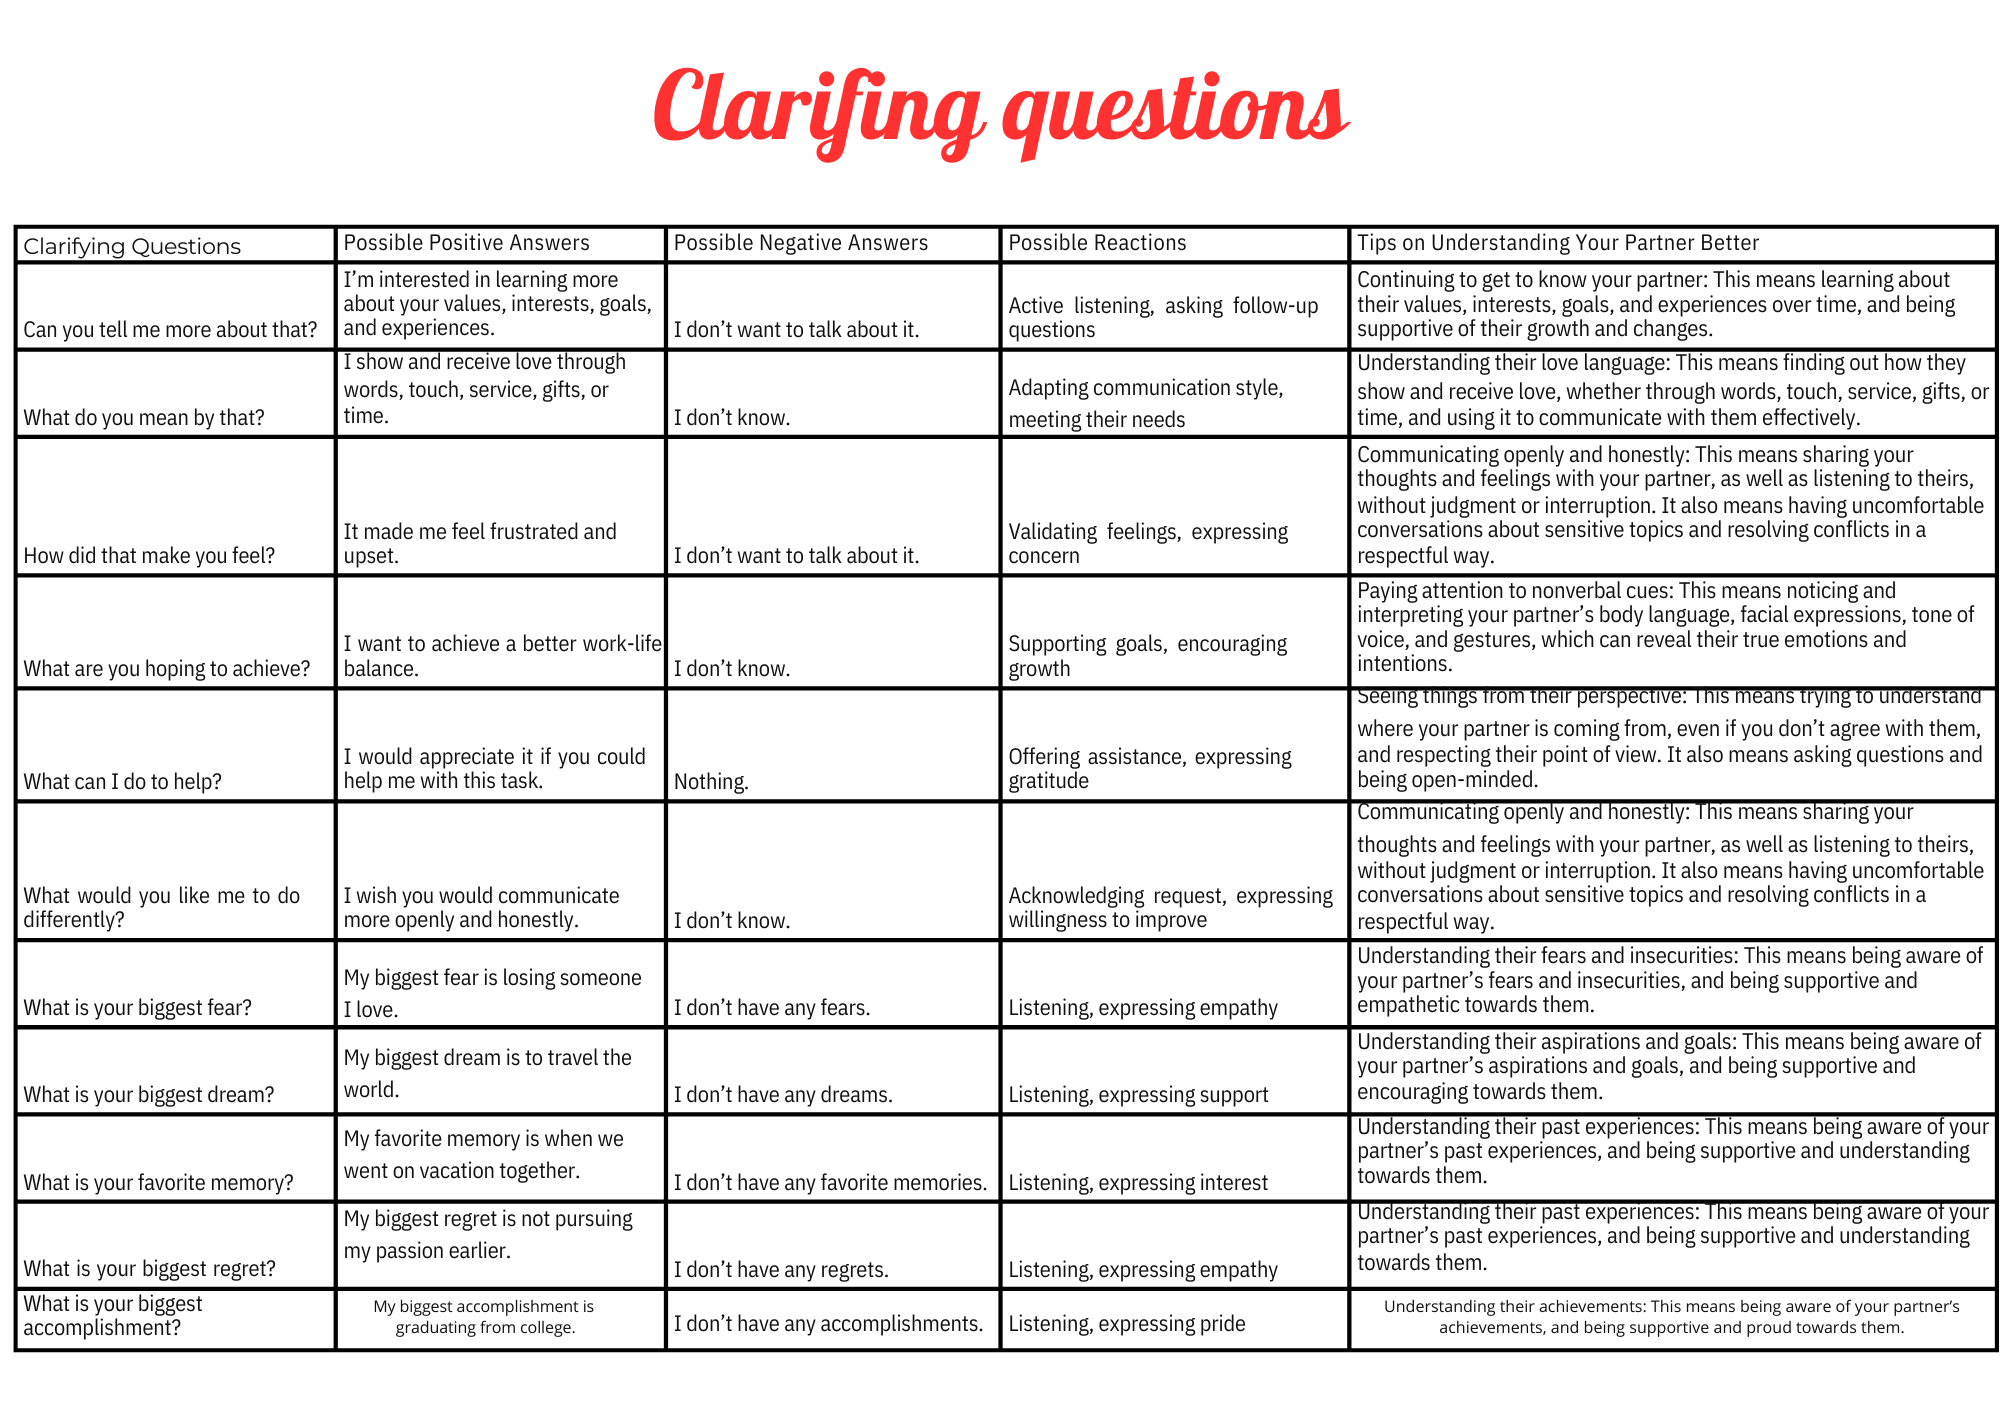 Clarifying questions table